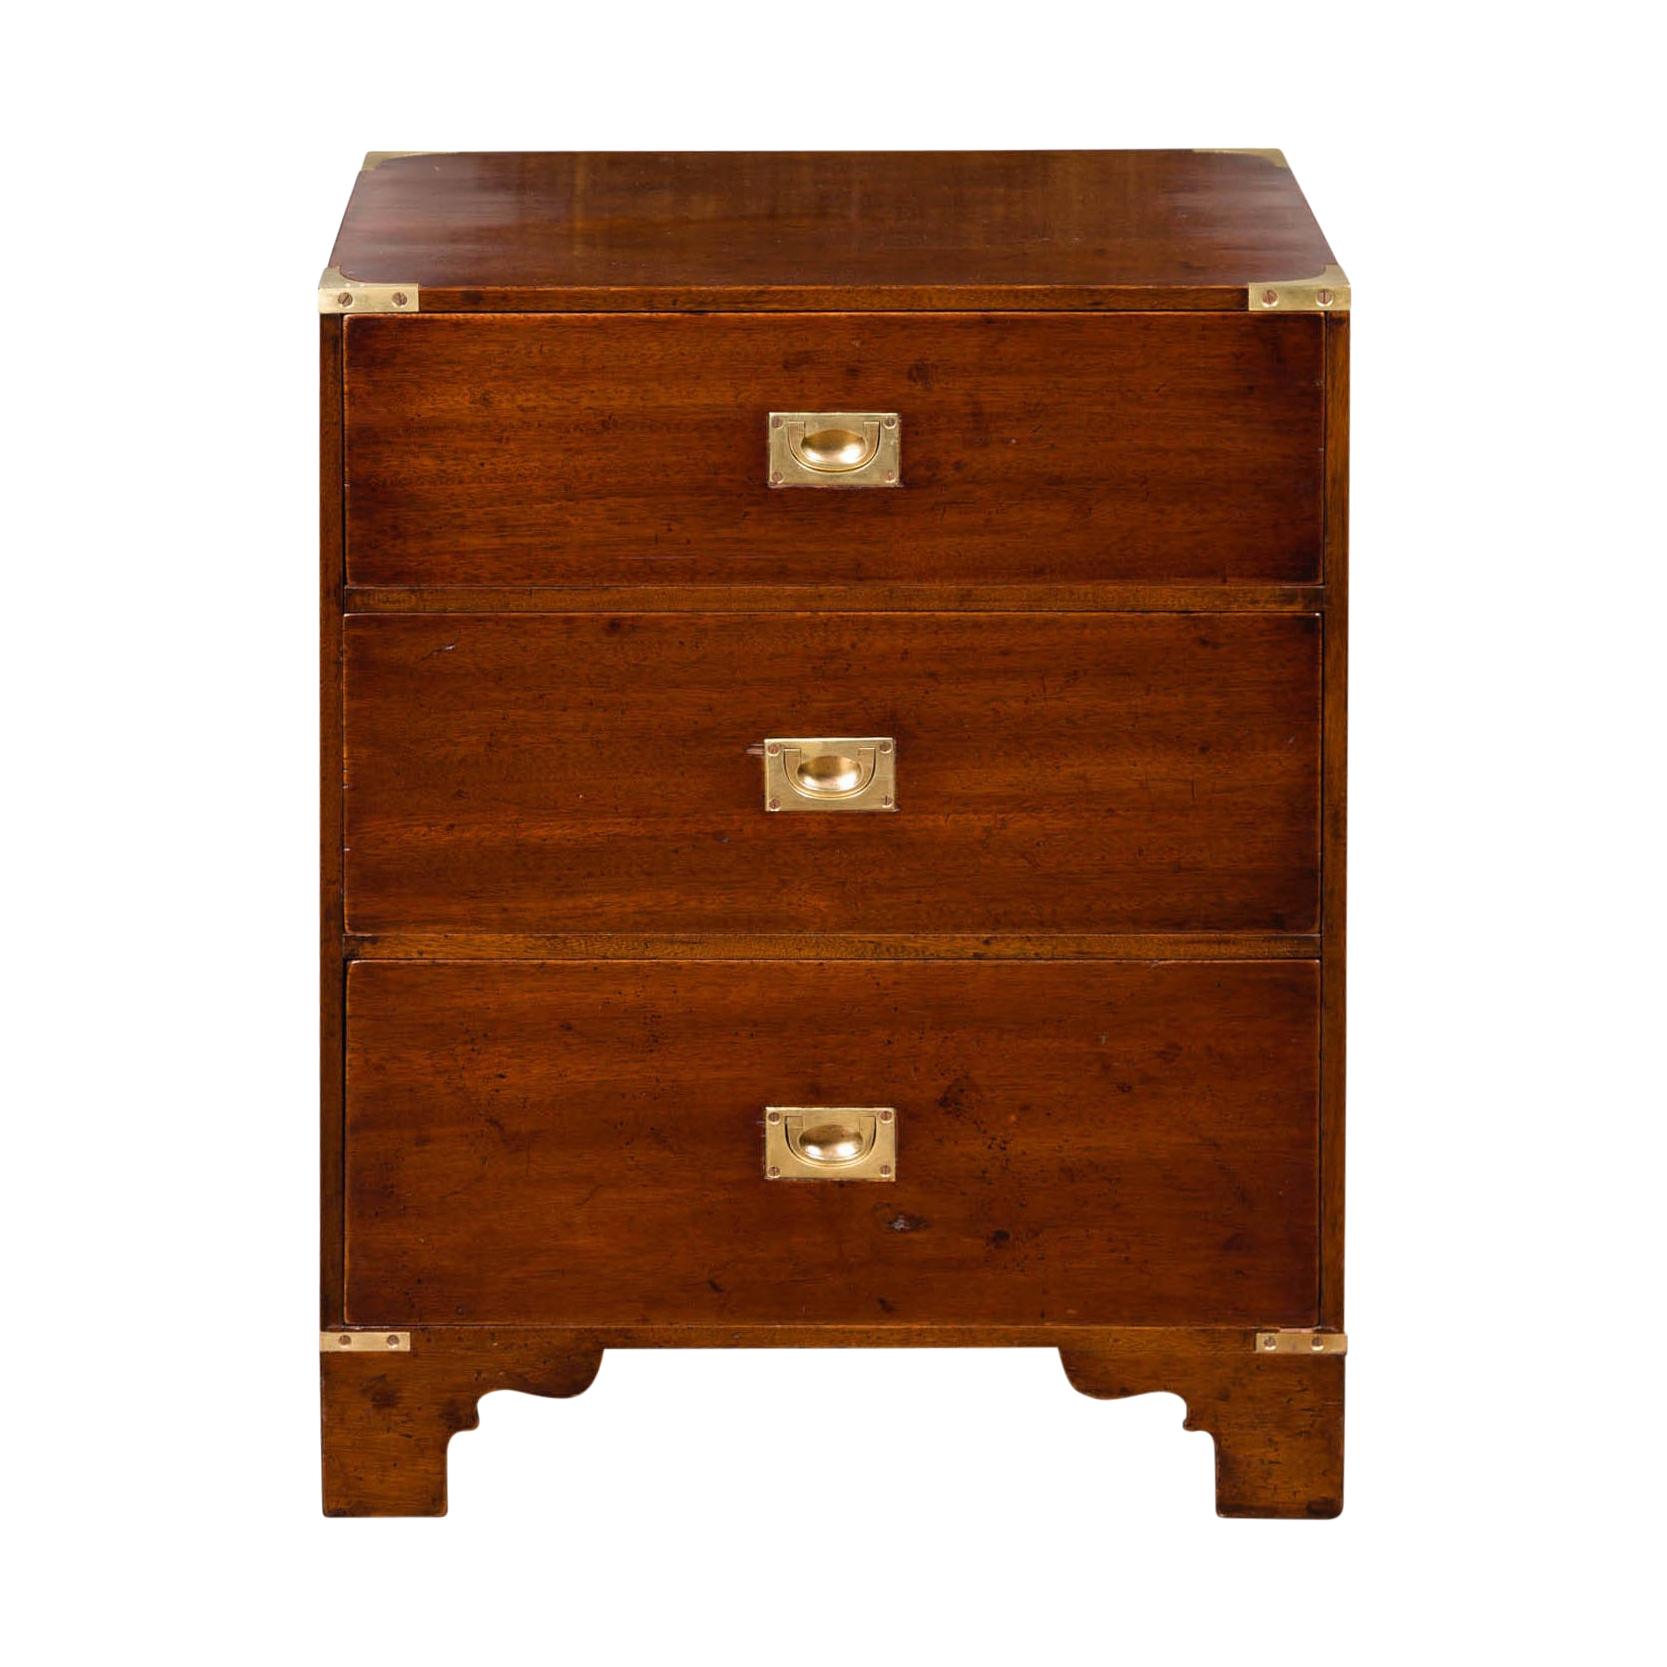 Midcentury English Mahogany Campaign Chest with Brass Hardware and Bracket Feet